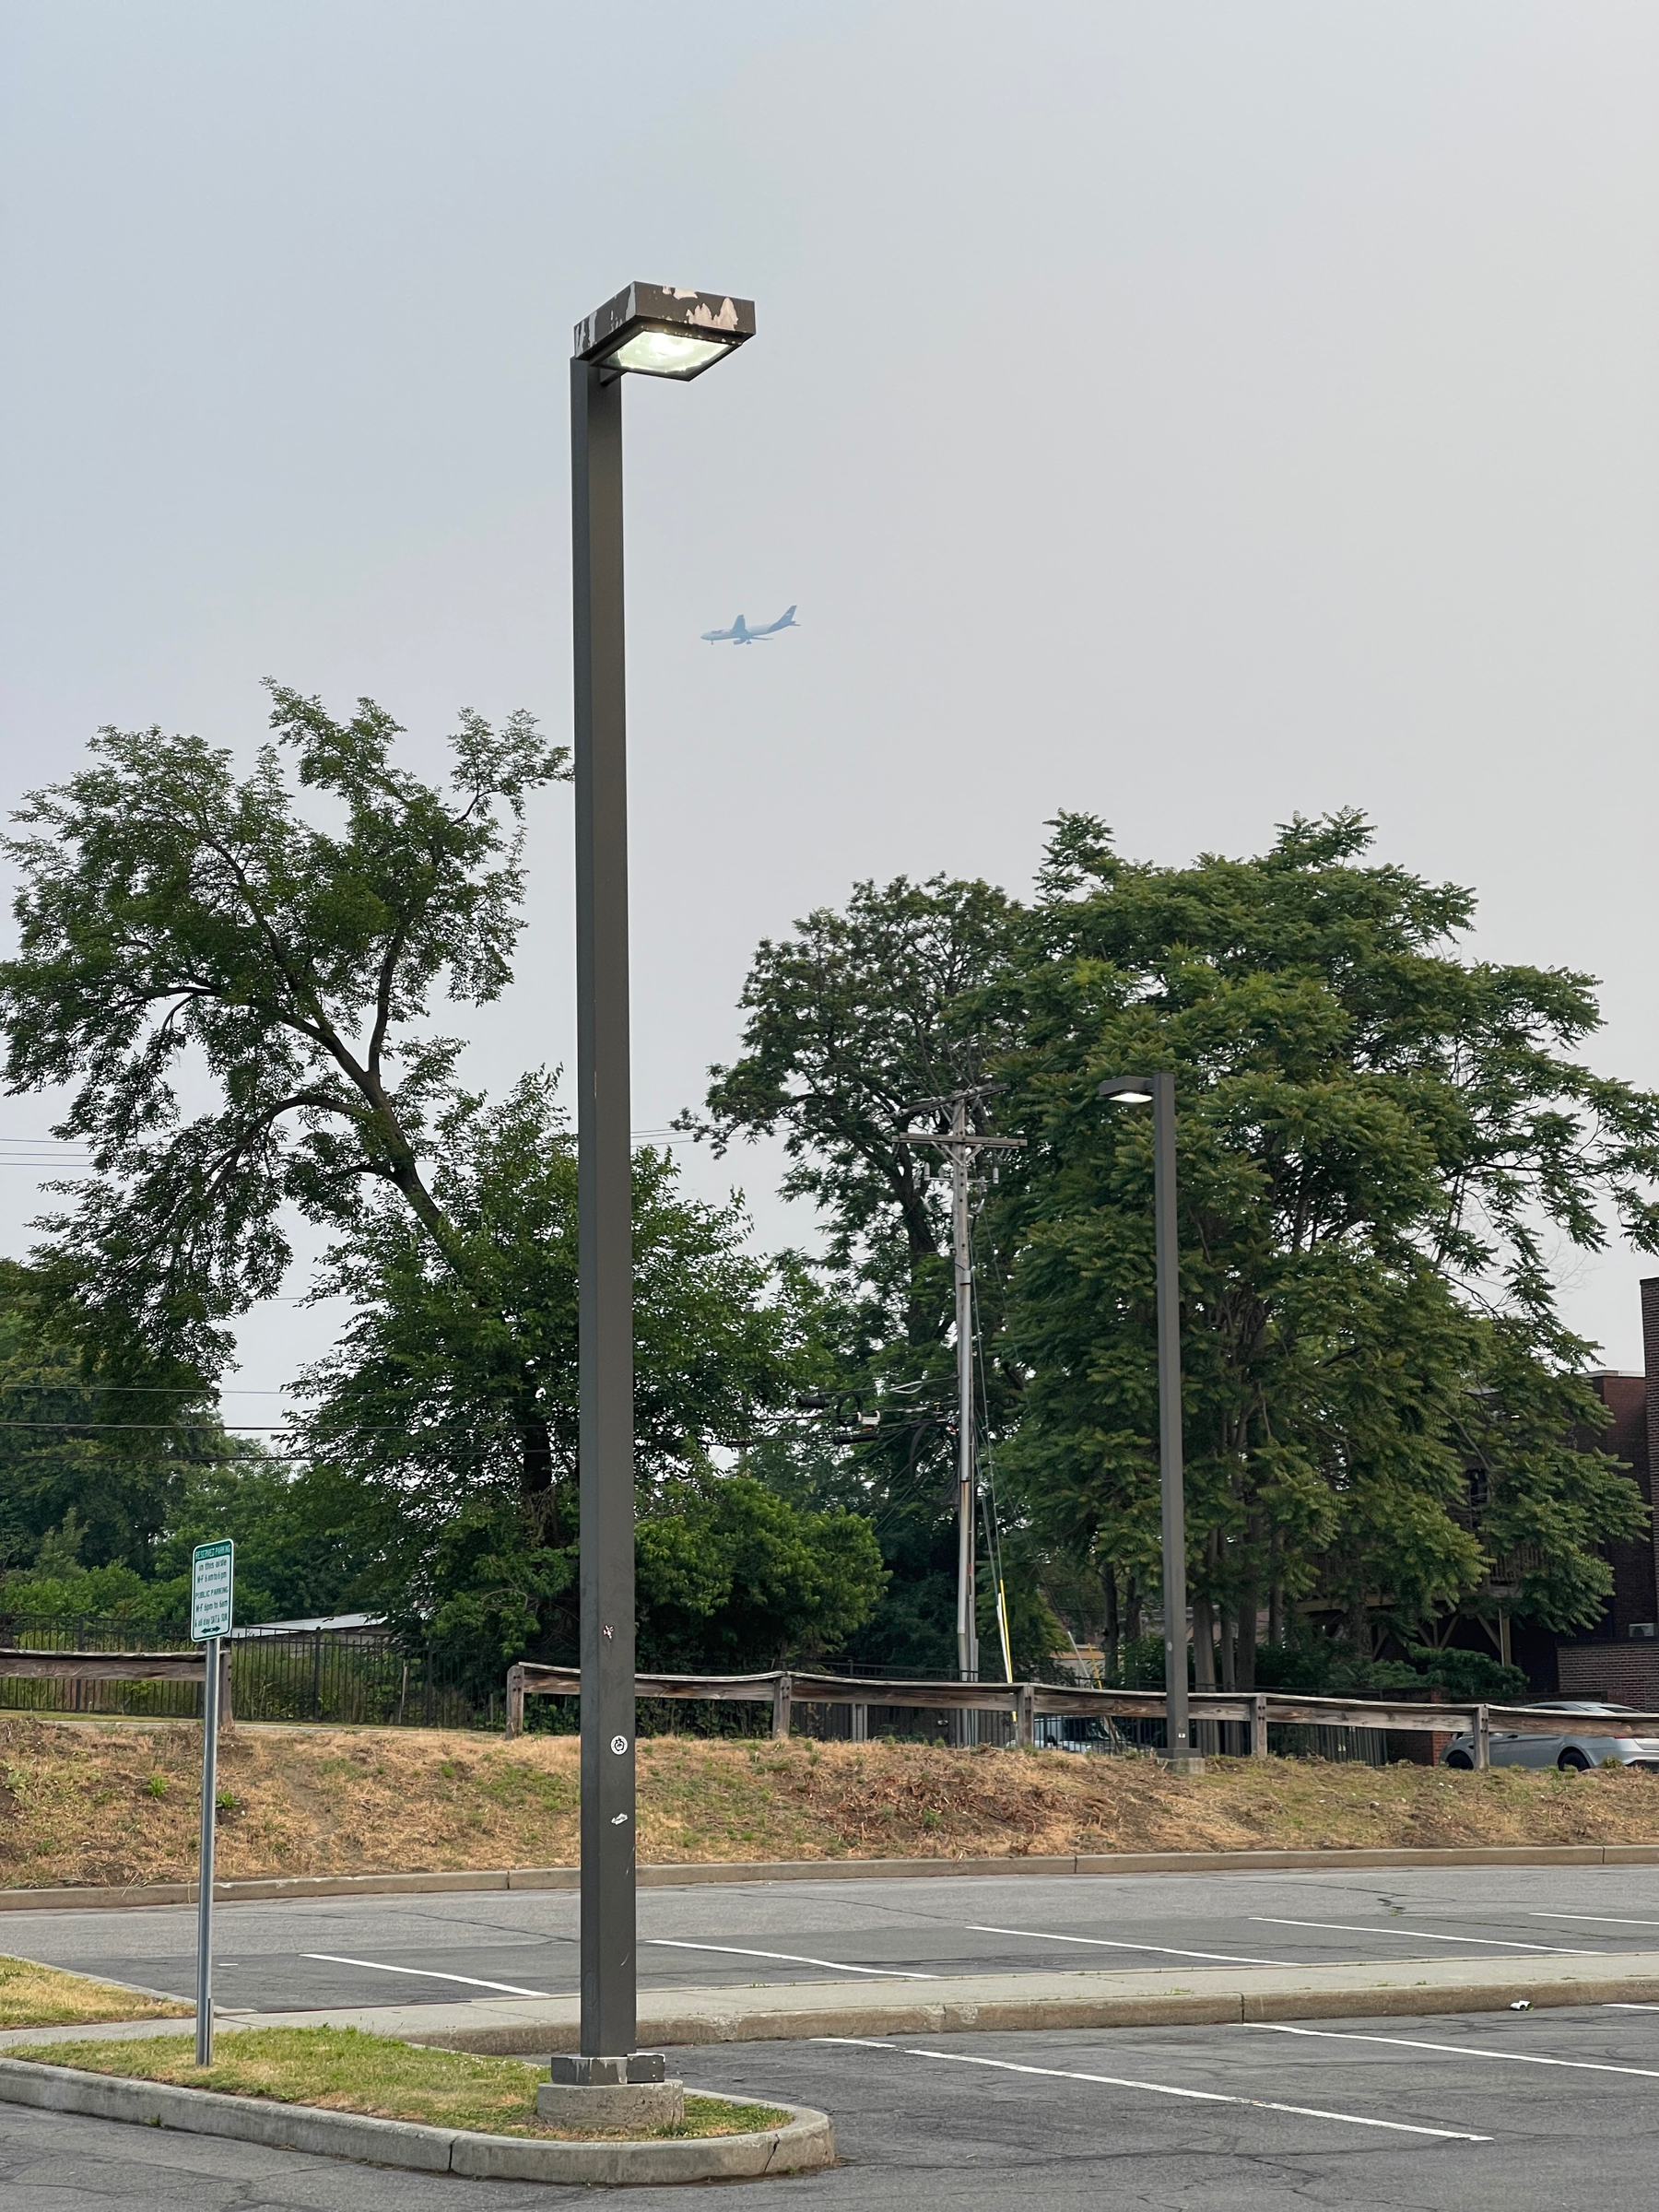 Parking lot, light pole, jet passenger plane flying by in the distance.